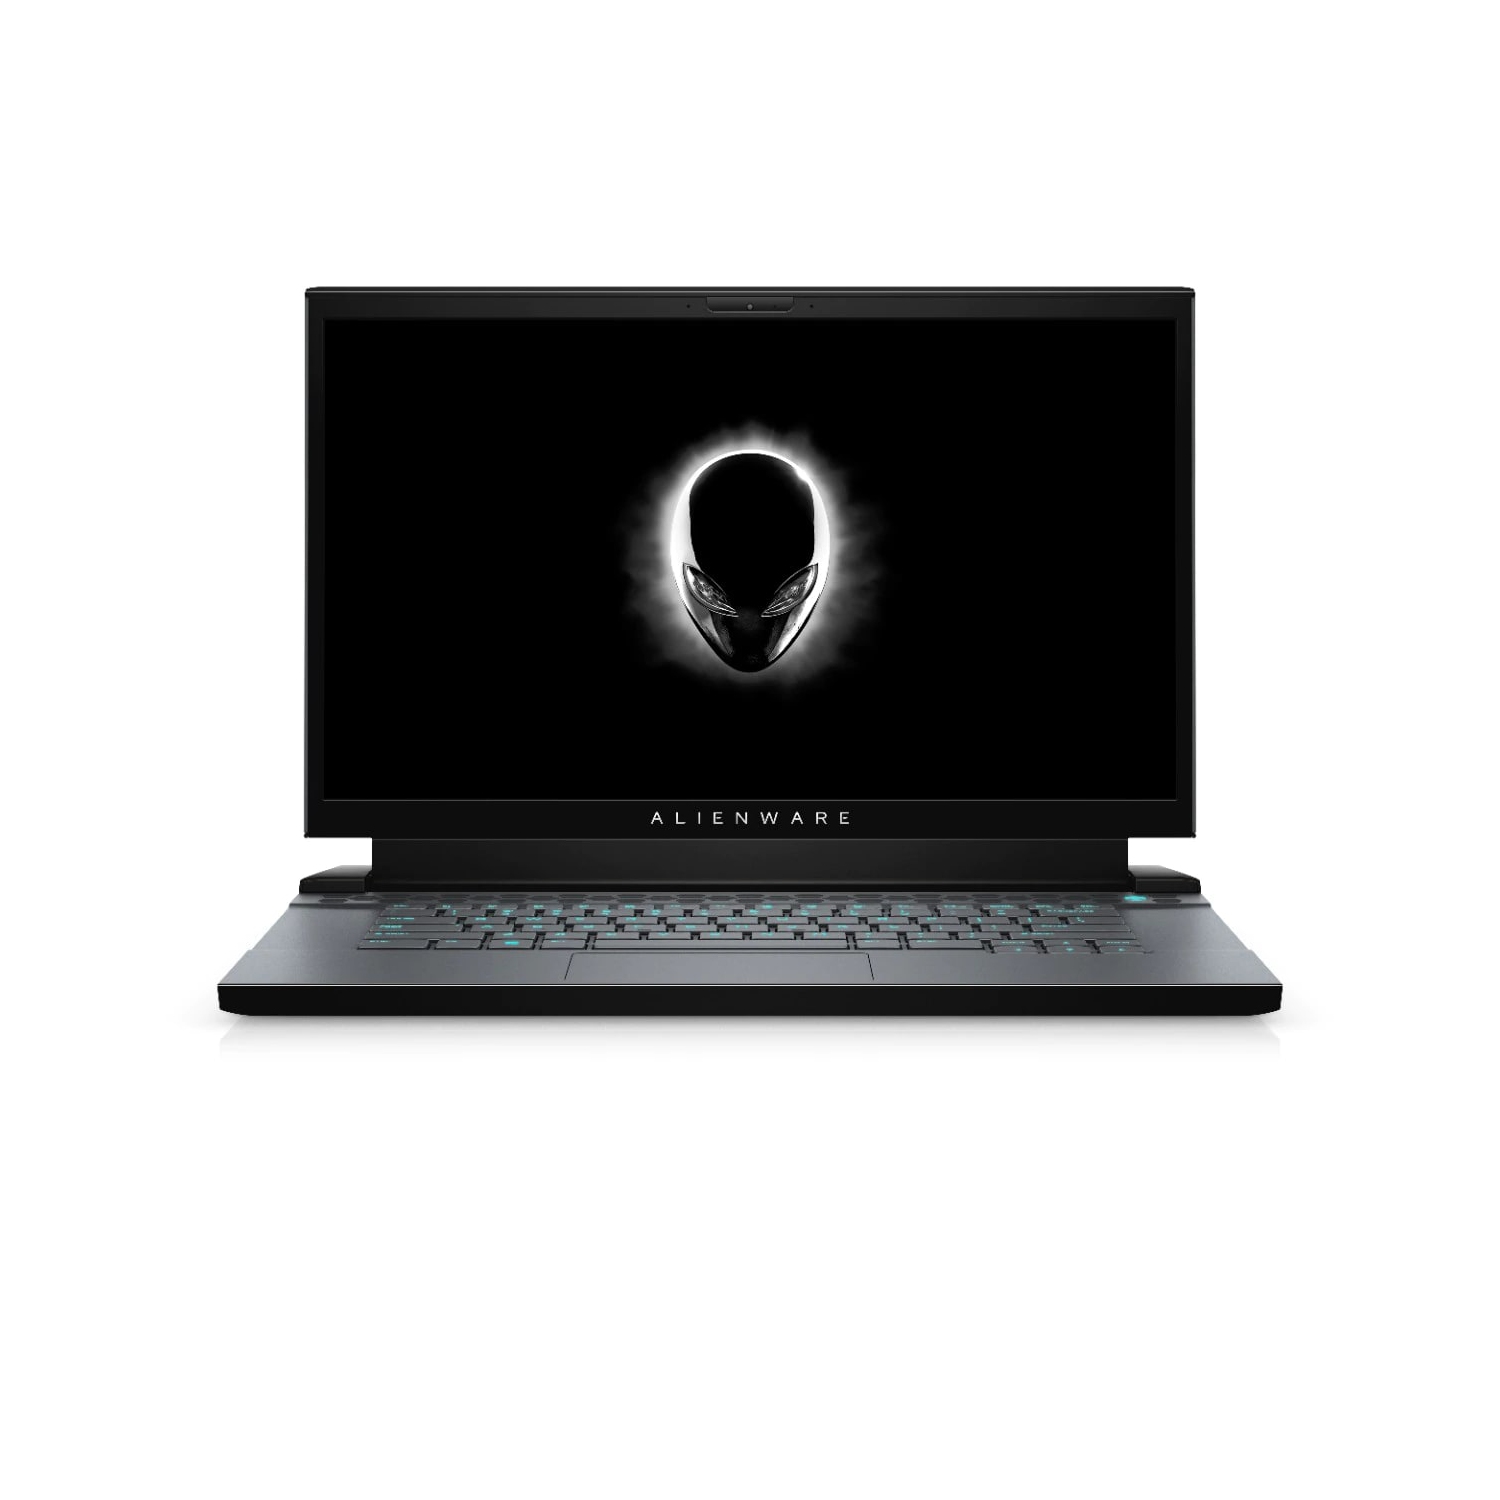 Refurbished (Excellent) - Dell Alienware m15 R2 Gaming Laptop (2019) | 15.6" FHD | Core i7 - 1TB SSD - 8GB RAM - RTX 2070 | 6 Cores @ 4.5 GHz Certified Refurbished